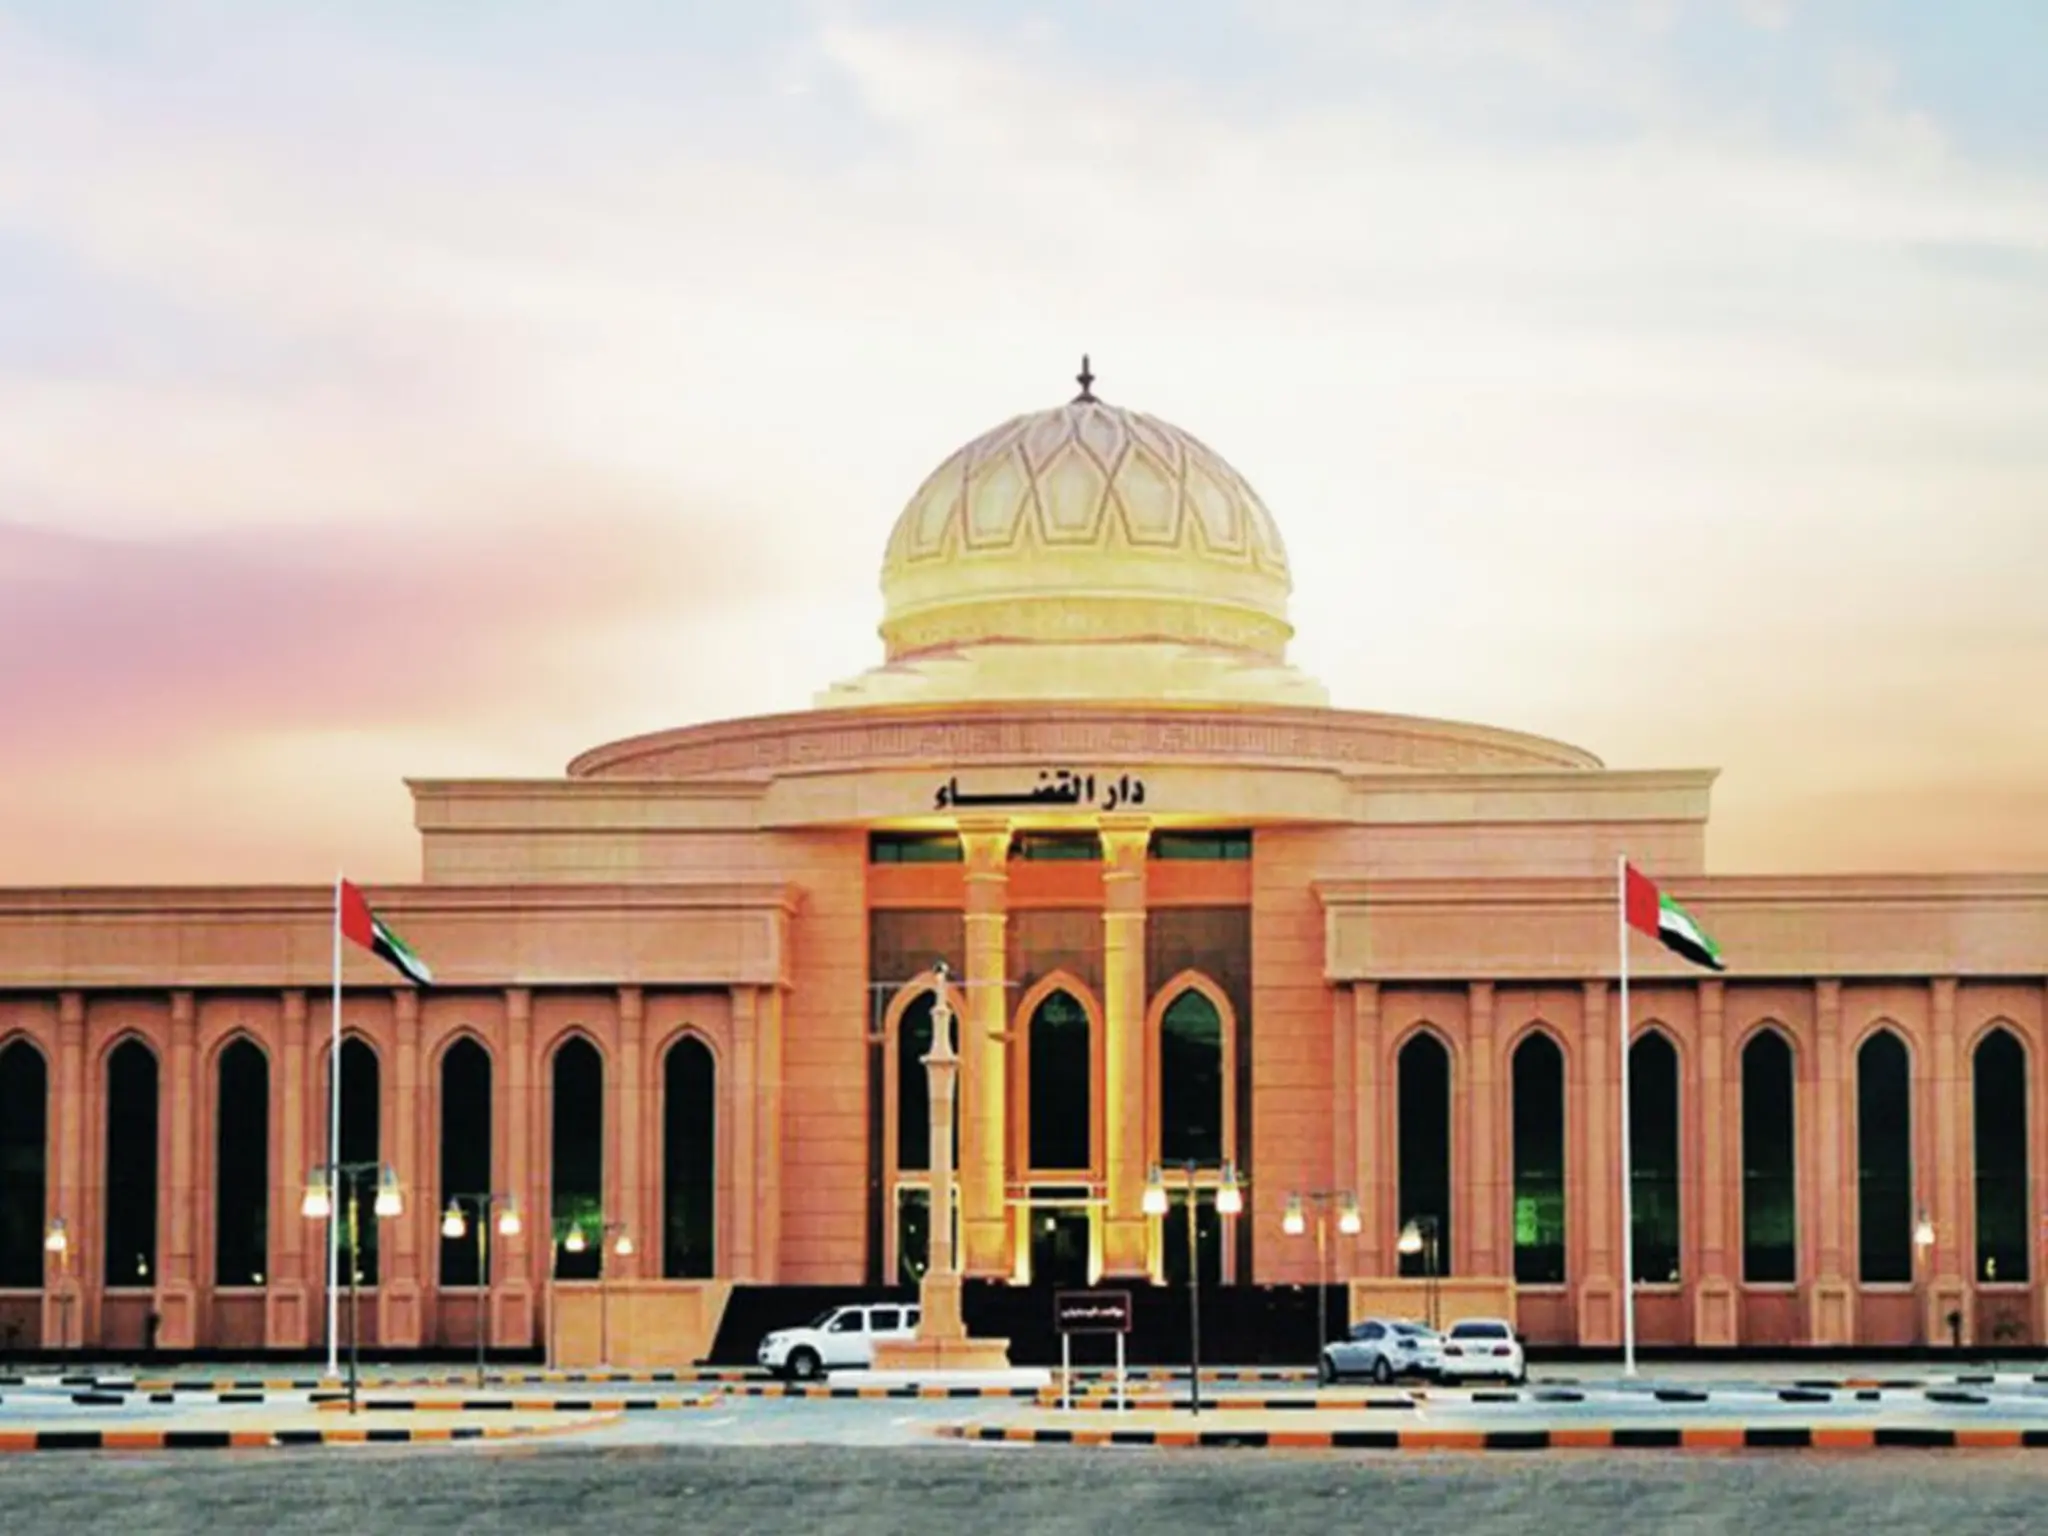 The court in Abu Dhabi fined a student’s father 53 thousand dirhams